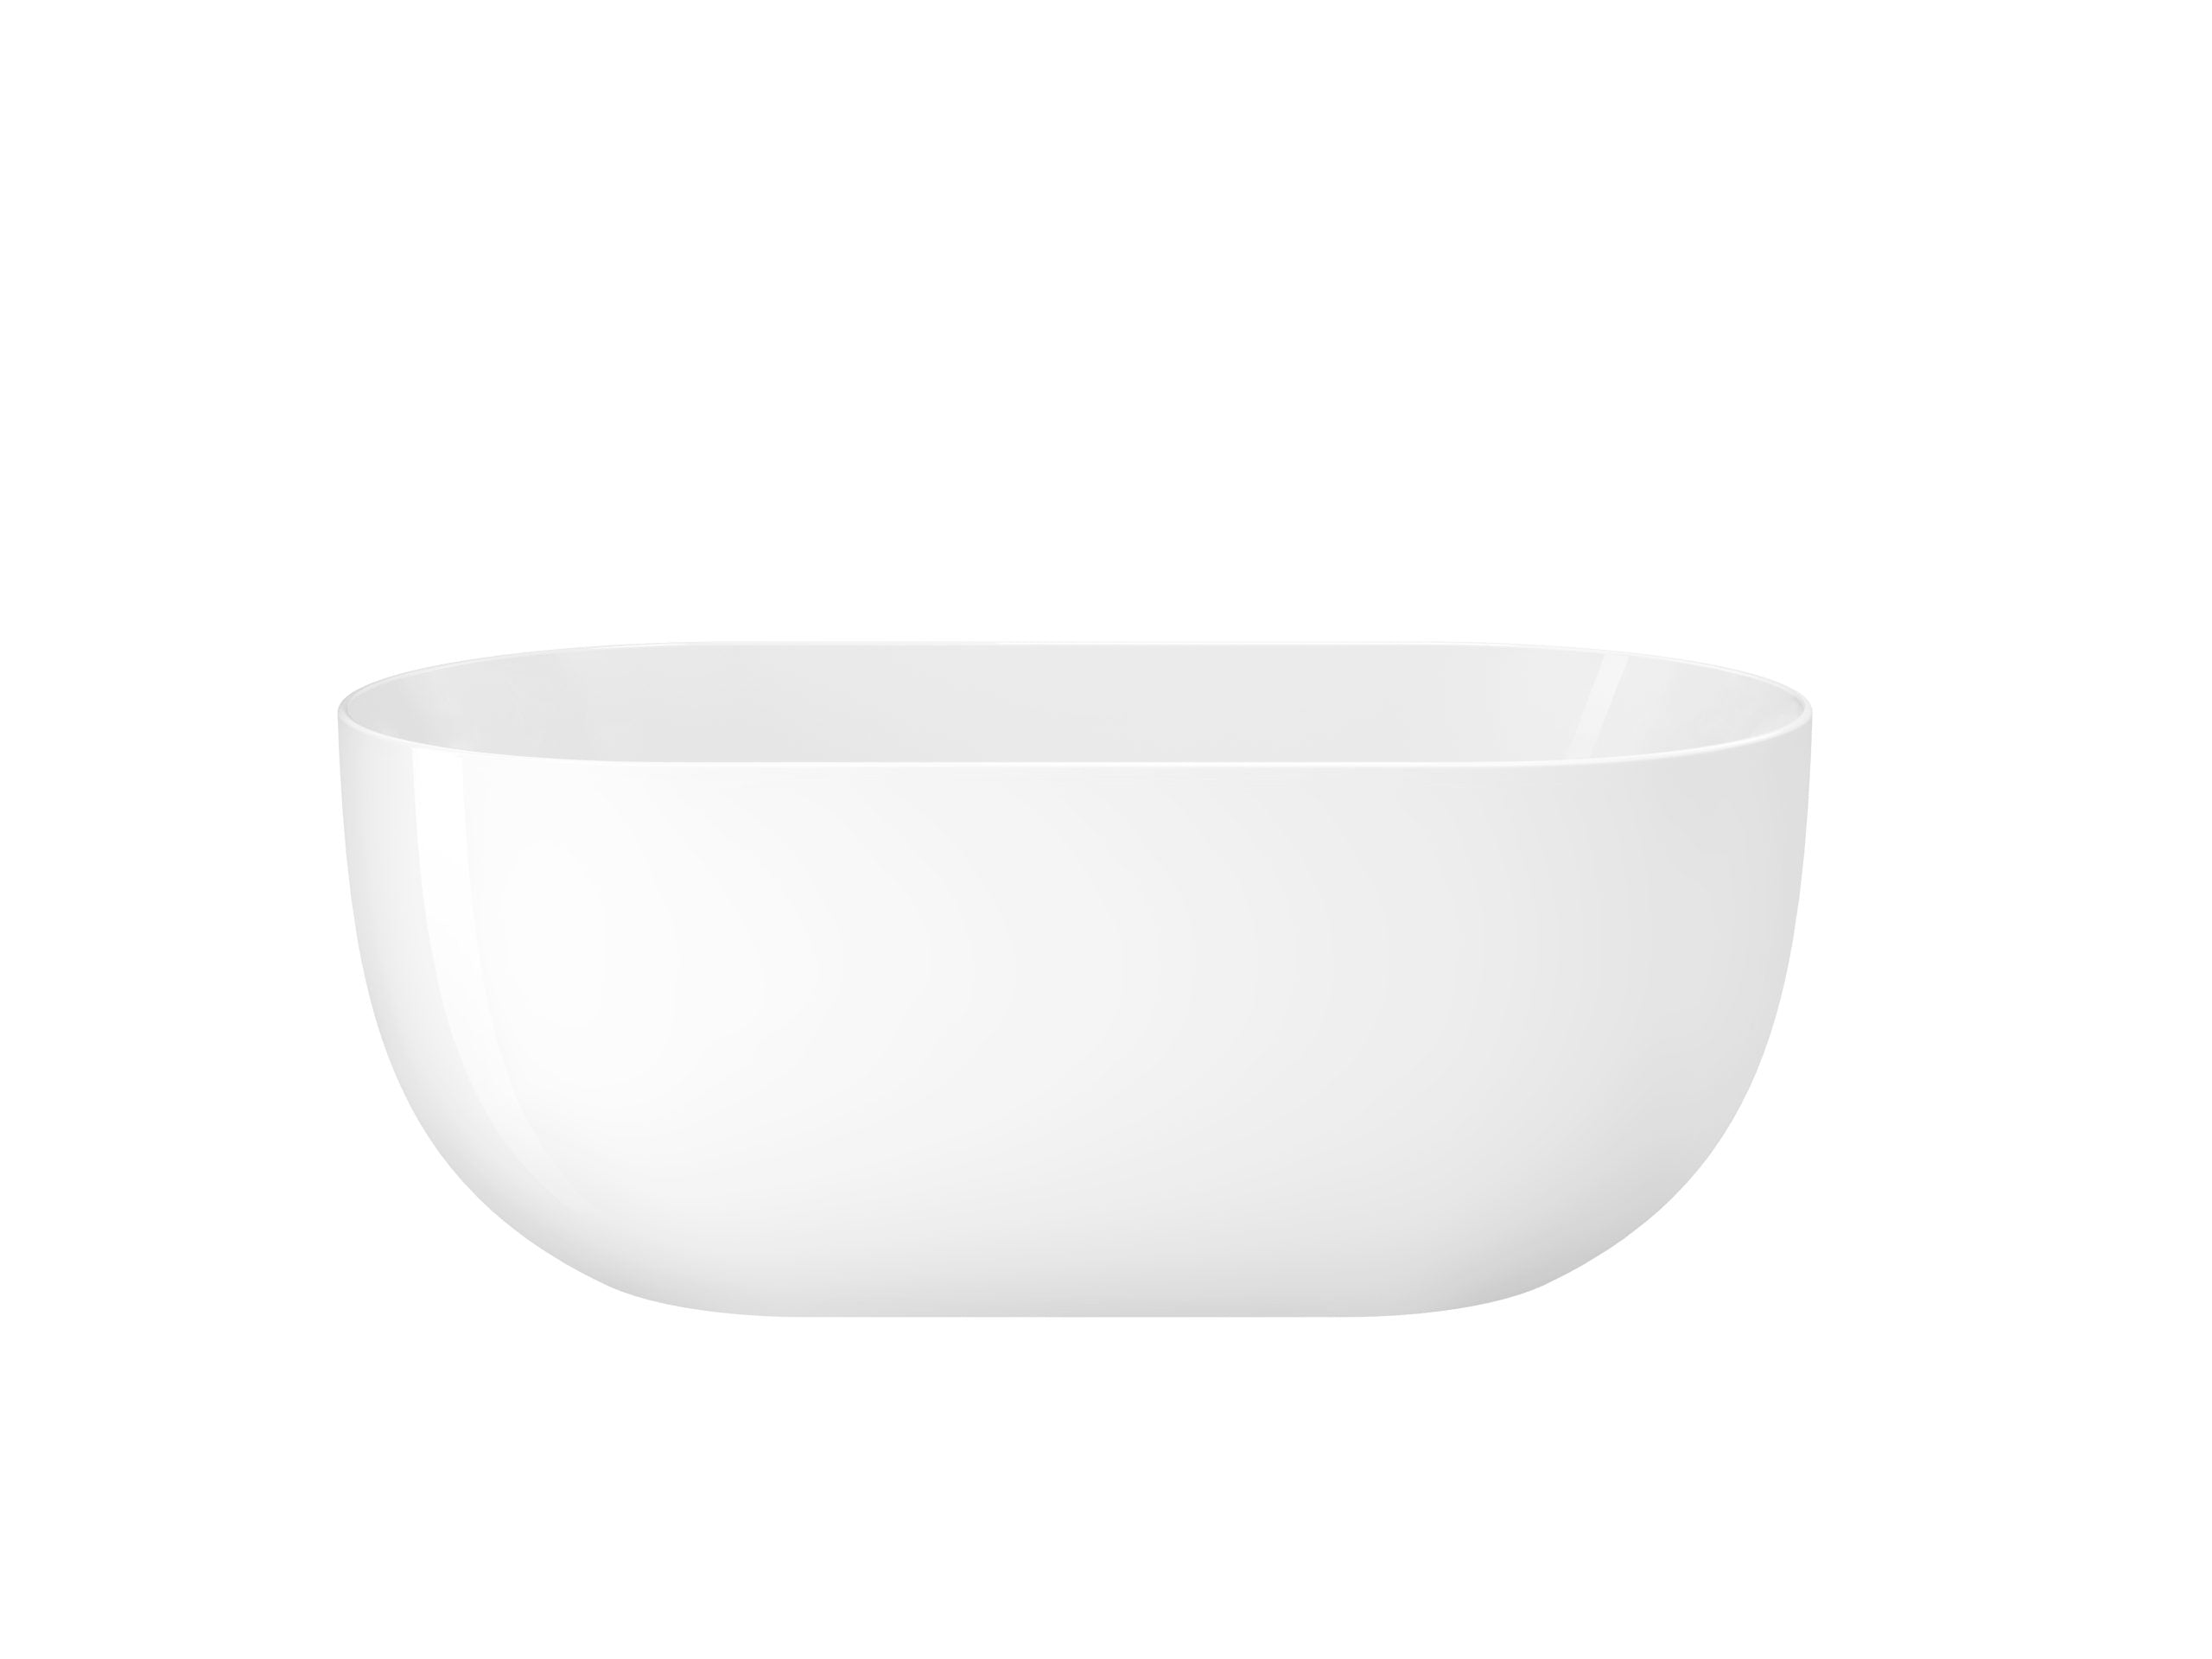 LINSOL NORA FREESTANDING BATHTUB GLOSS WHITE (AVAILABLE IN 1500MM AND 1700MM)